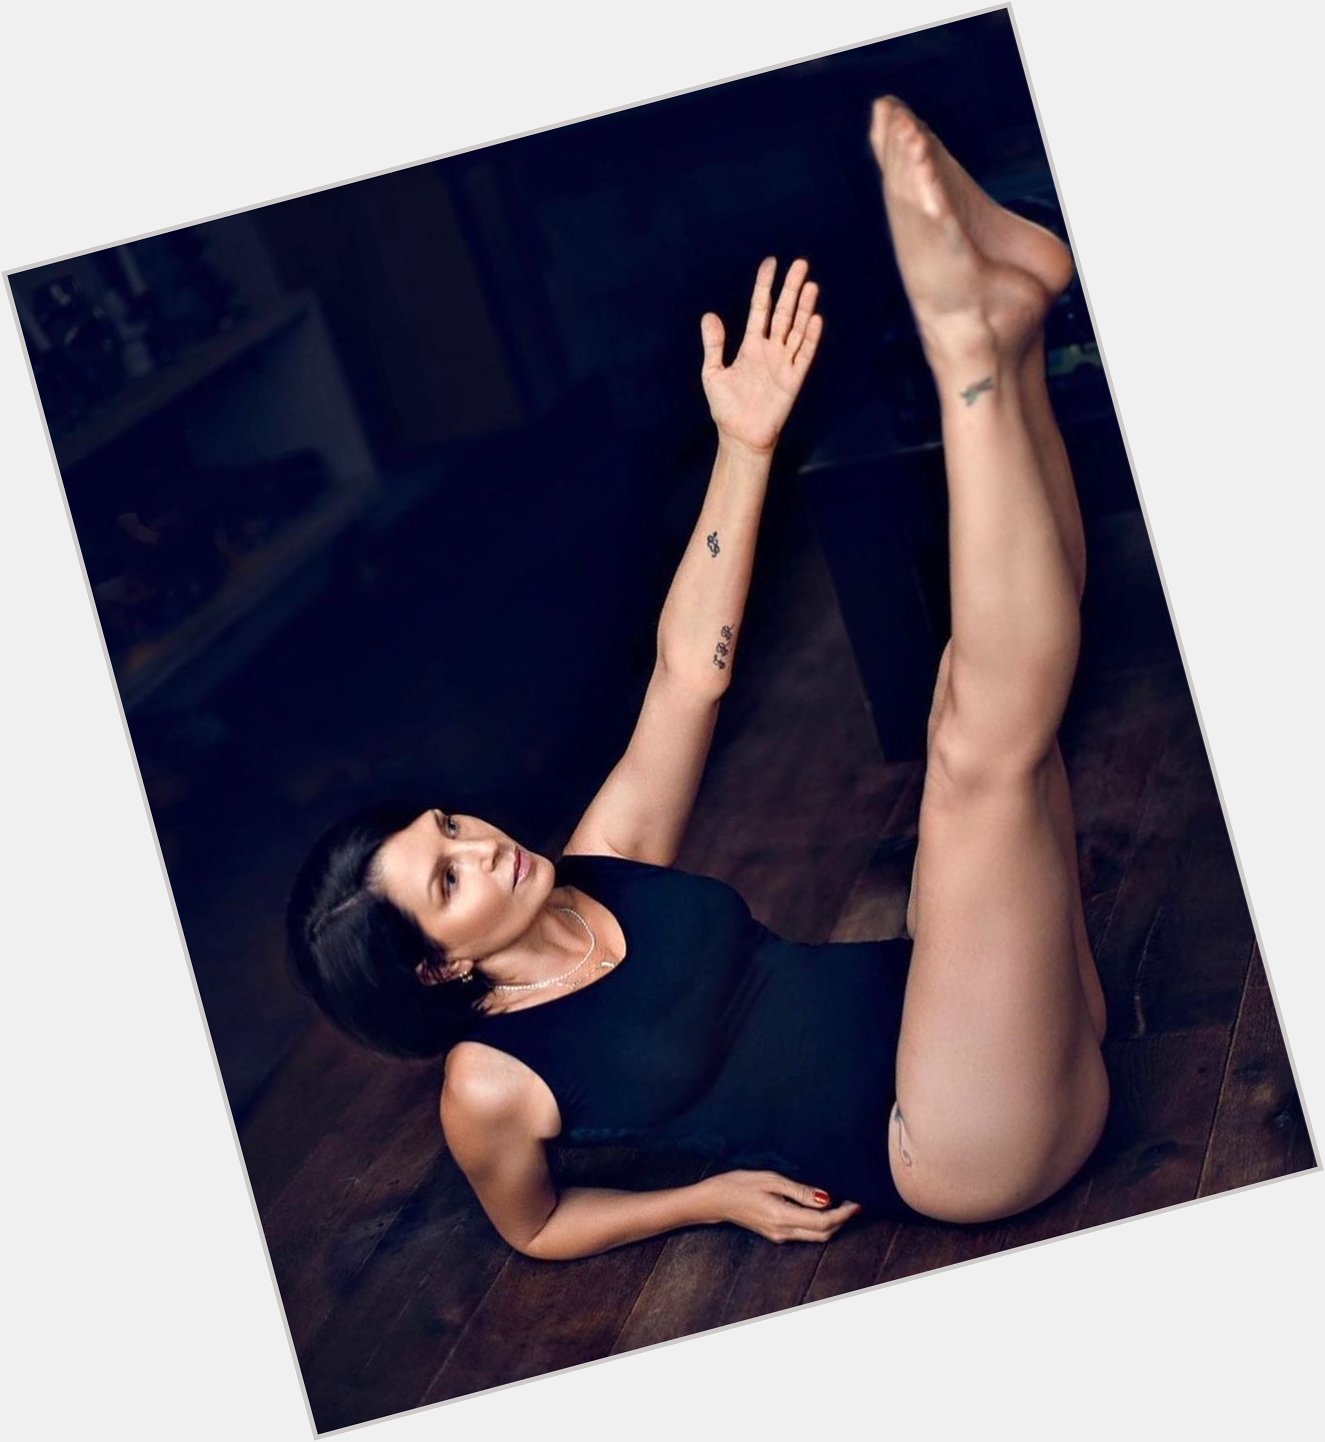 Happy birthday all over Sadie Frost and her own-brand yoga gear 